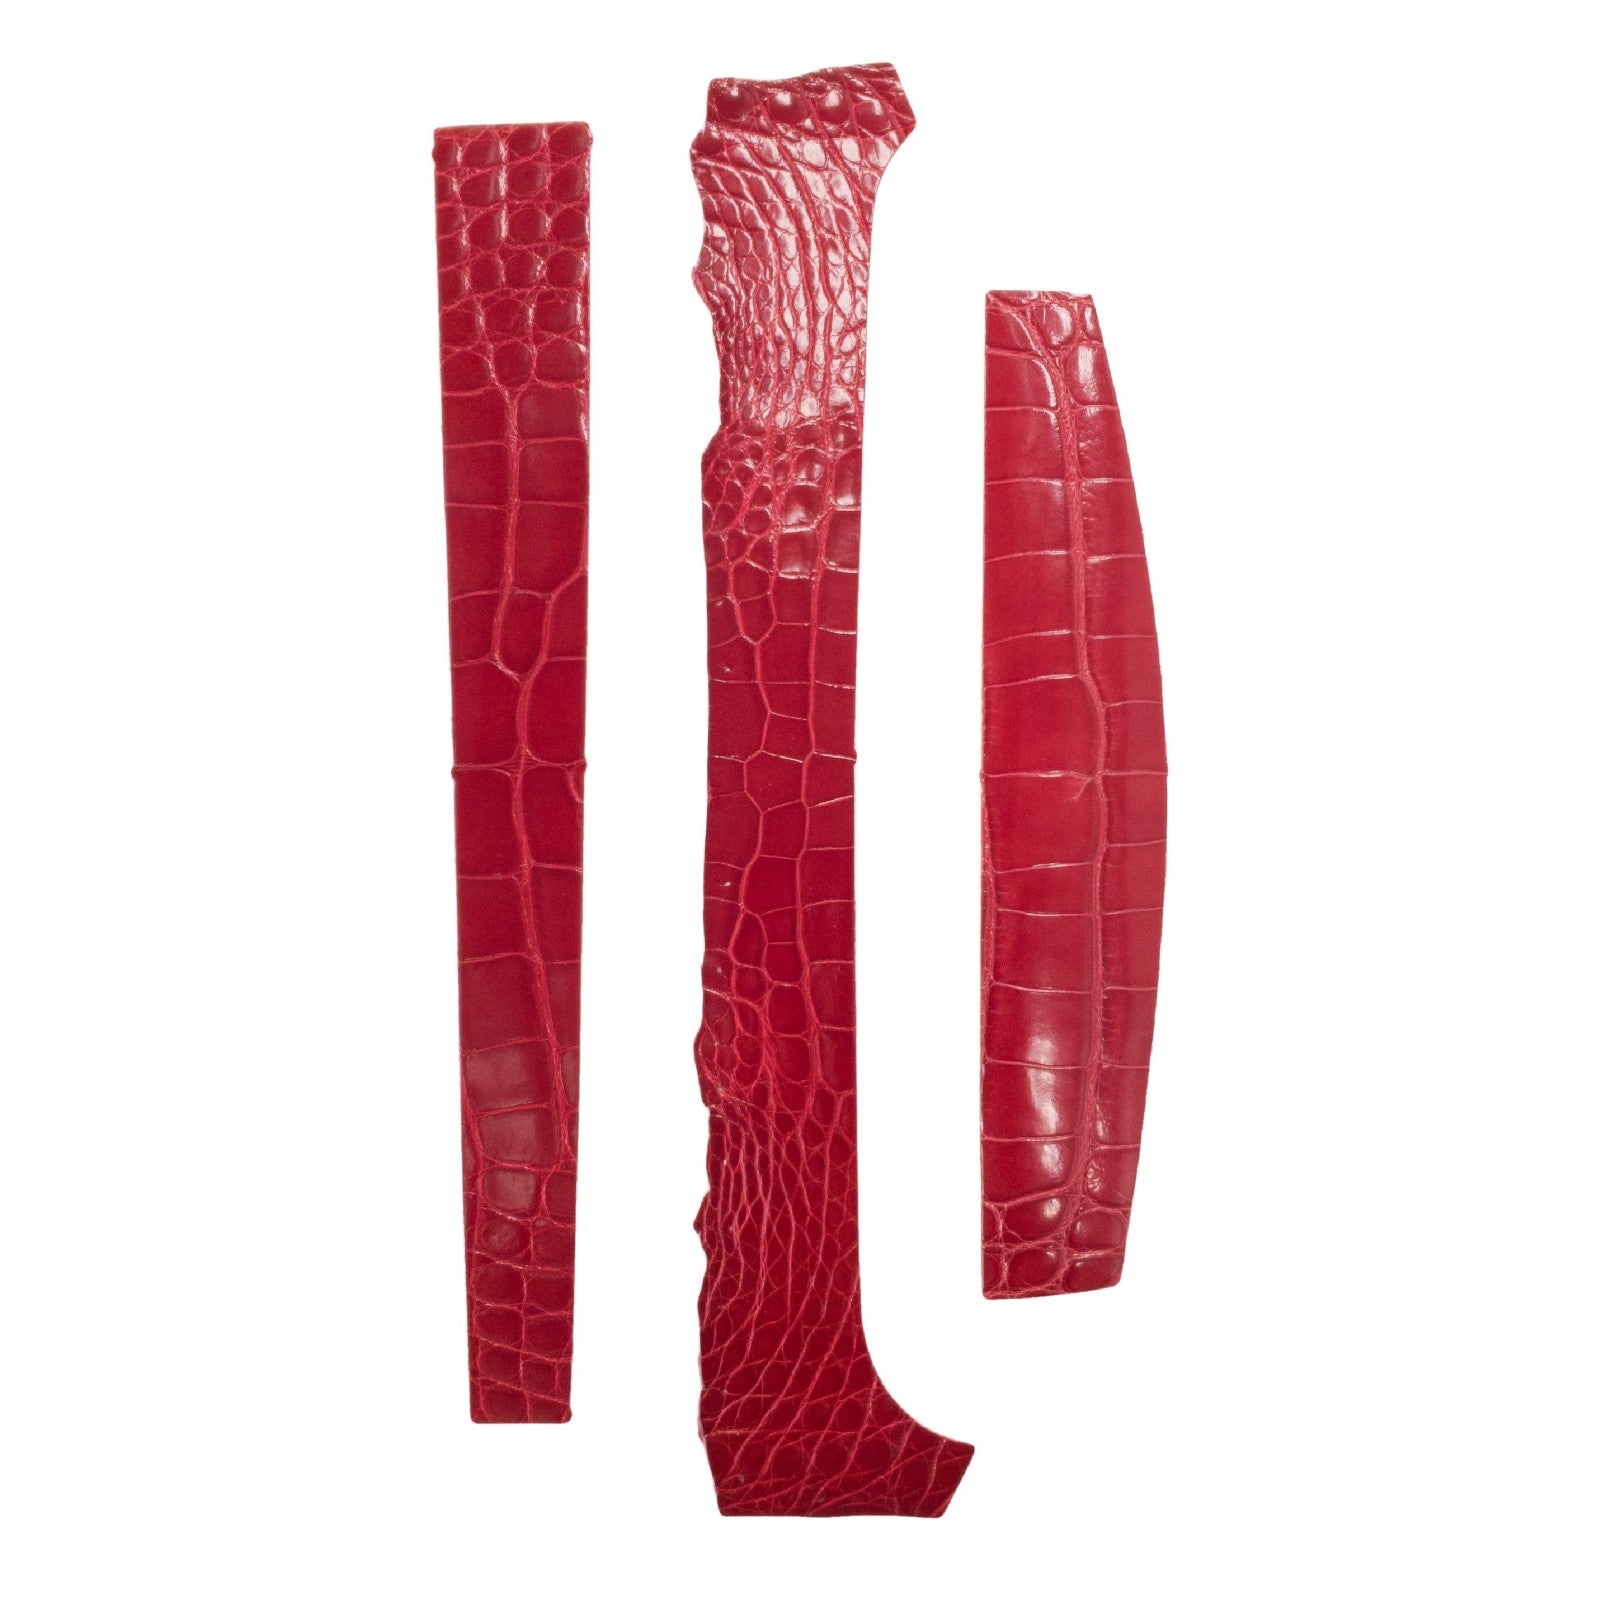 Alligator Skin Pieces Various Colors Genuine Hide, Red / Strap 1 | The Leather Guy